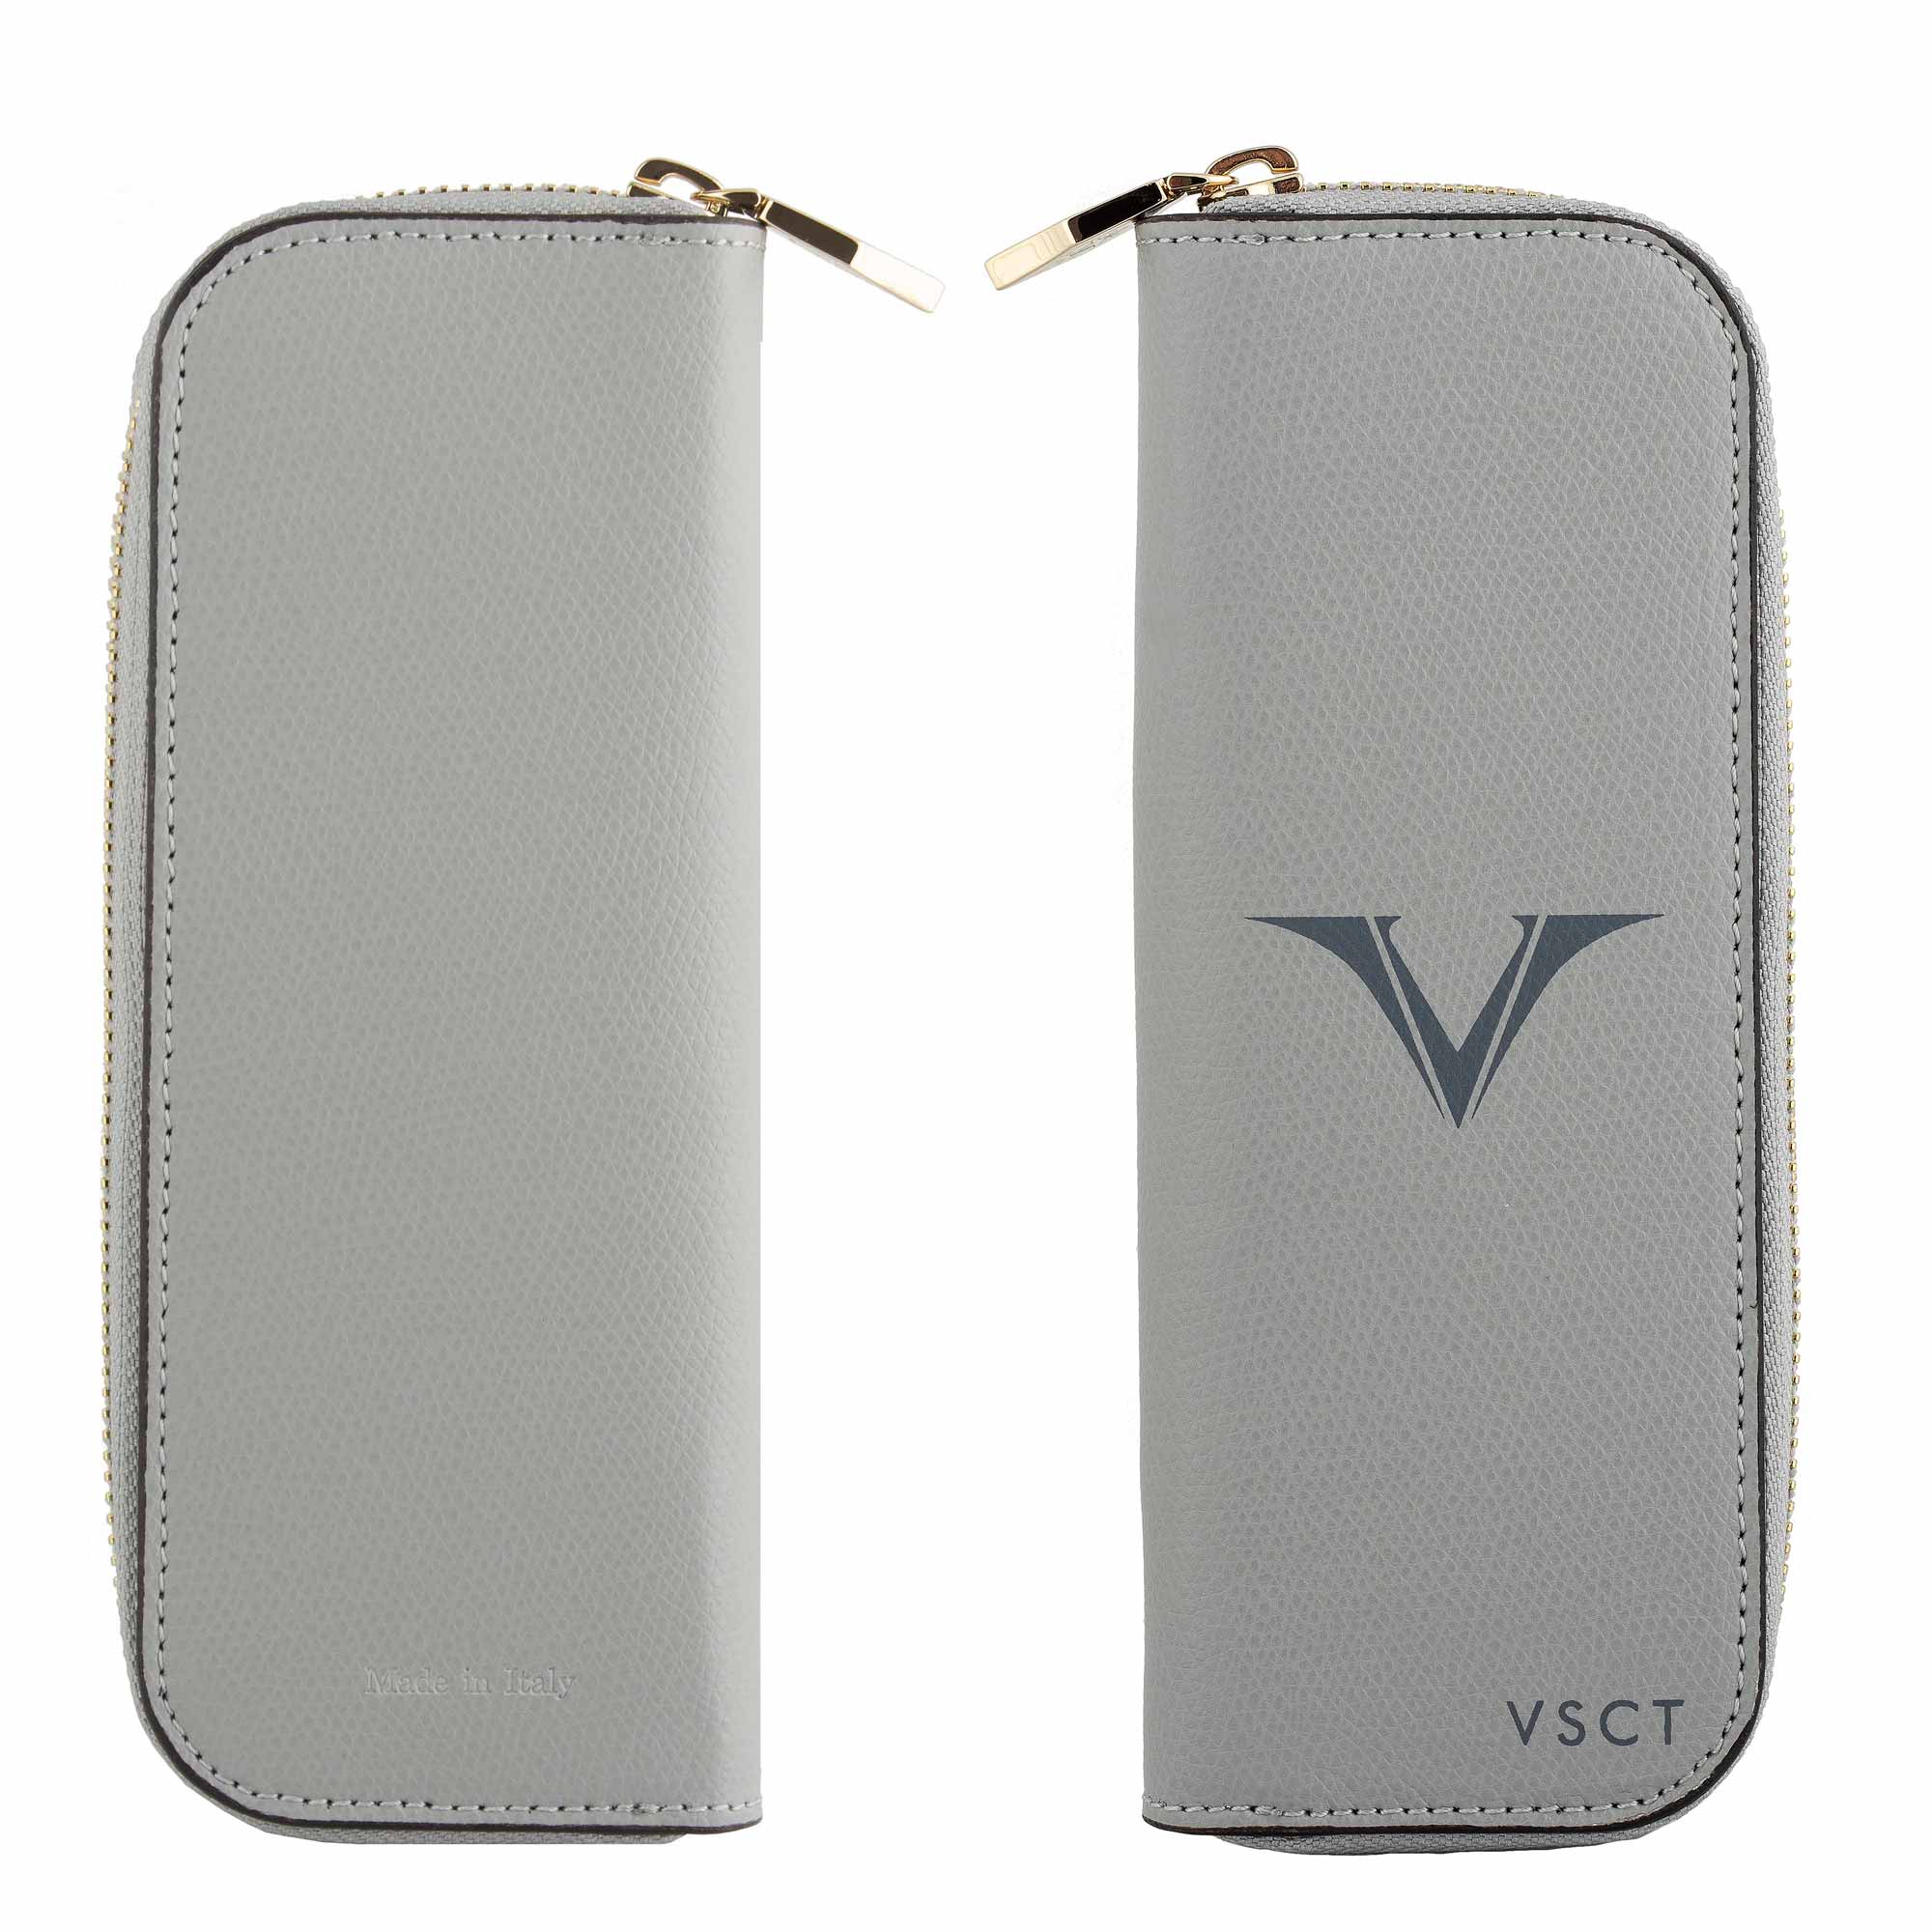 Visconti Dreamtouch Leather and Silk Silver Pen Cases in 1, 2, 3, 6 and 12.  - Chatterley